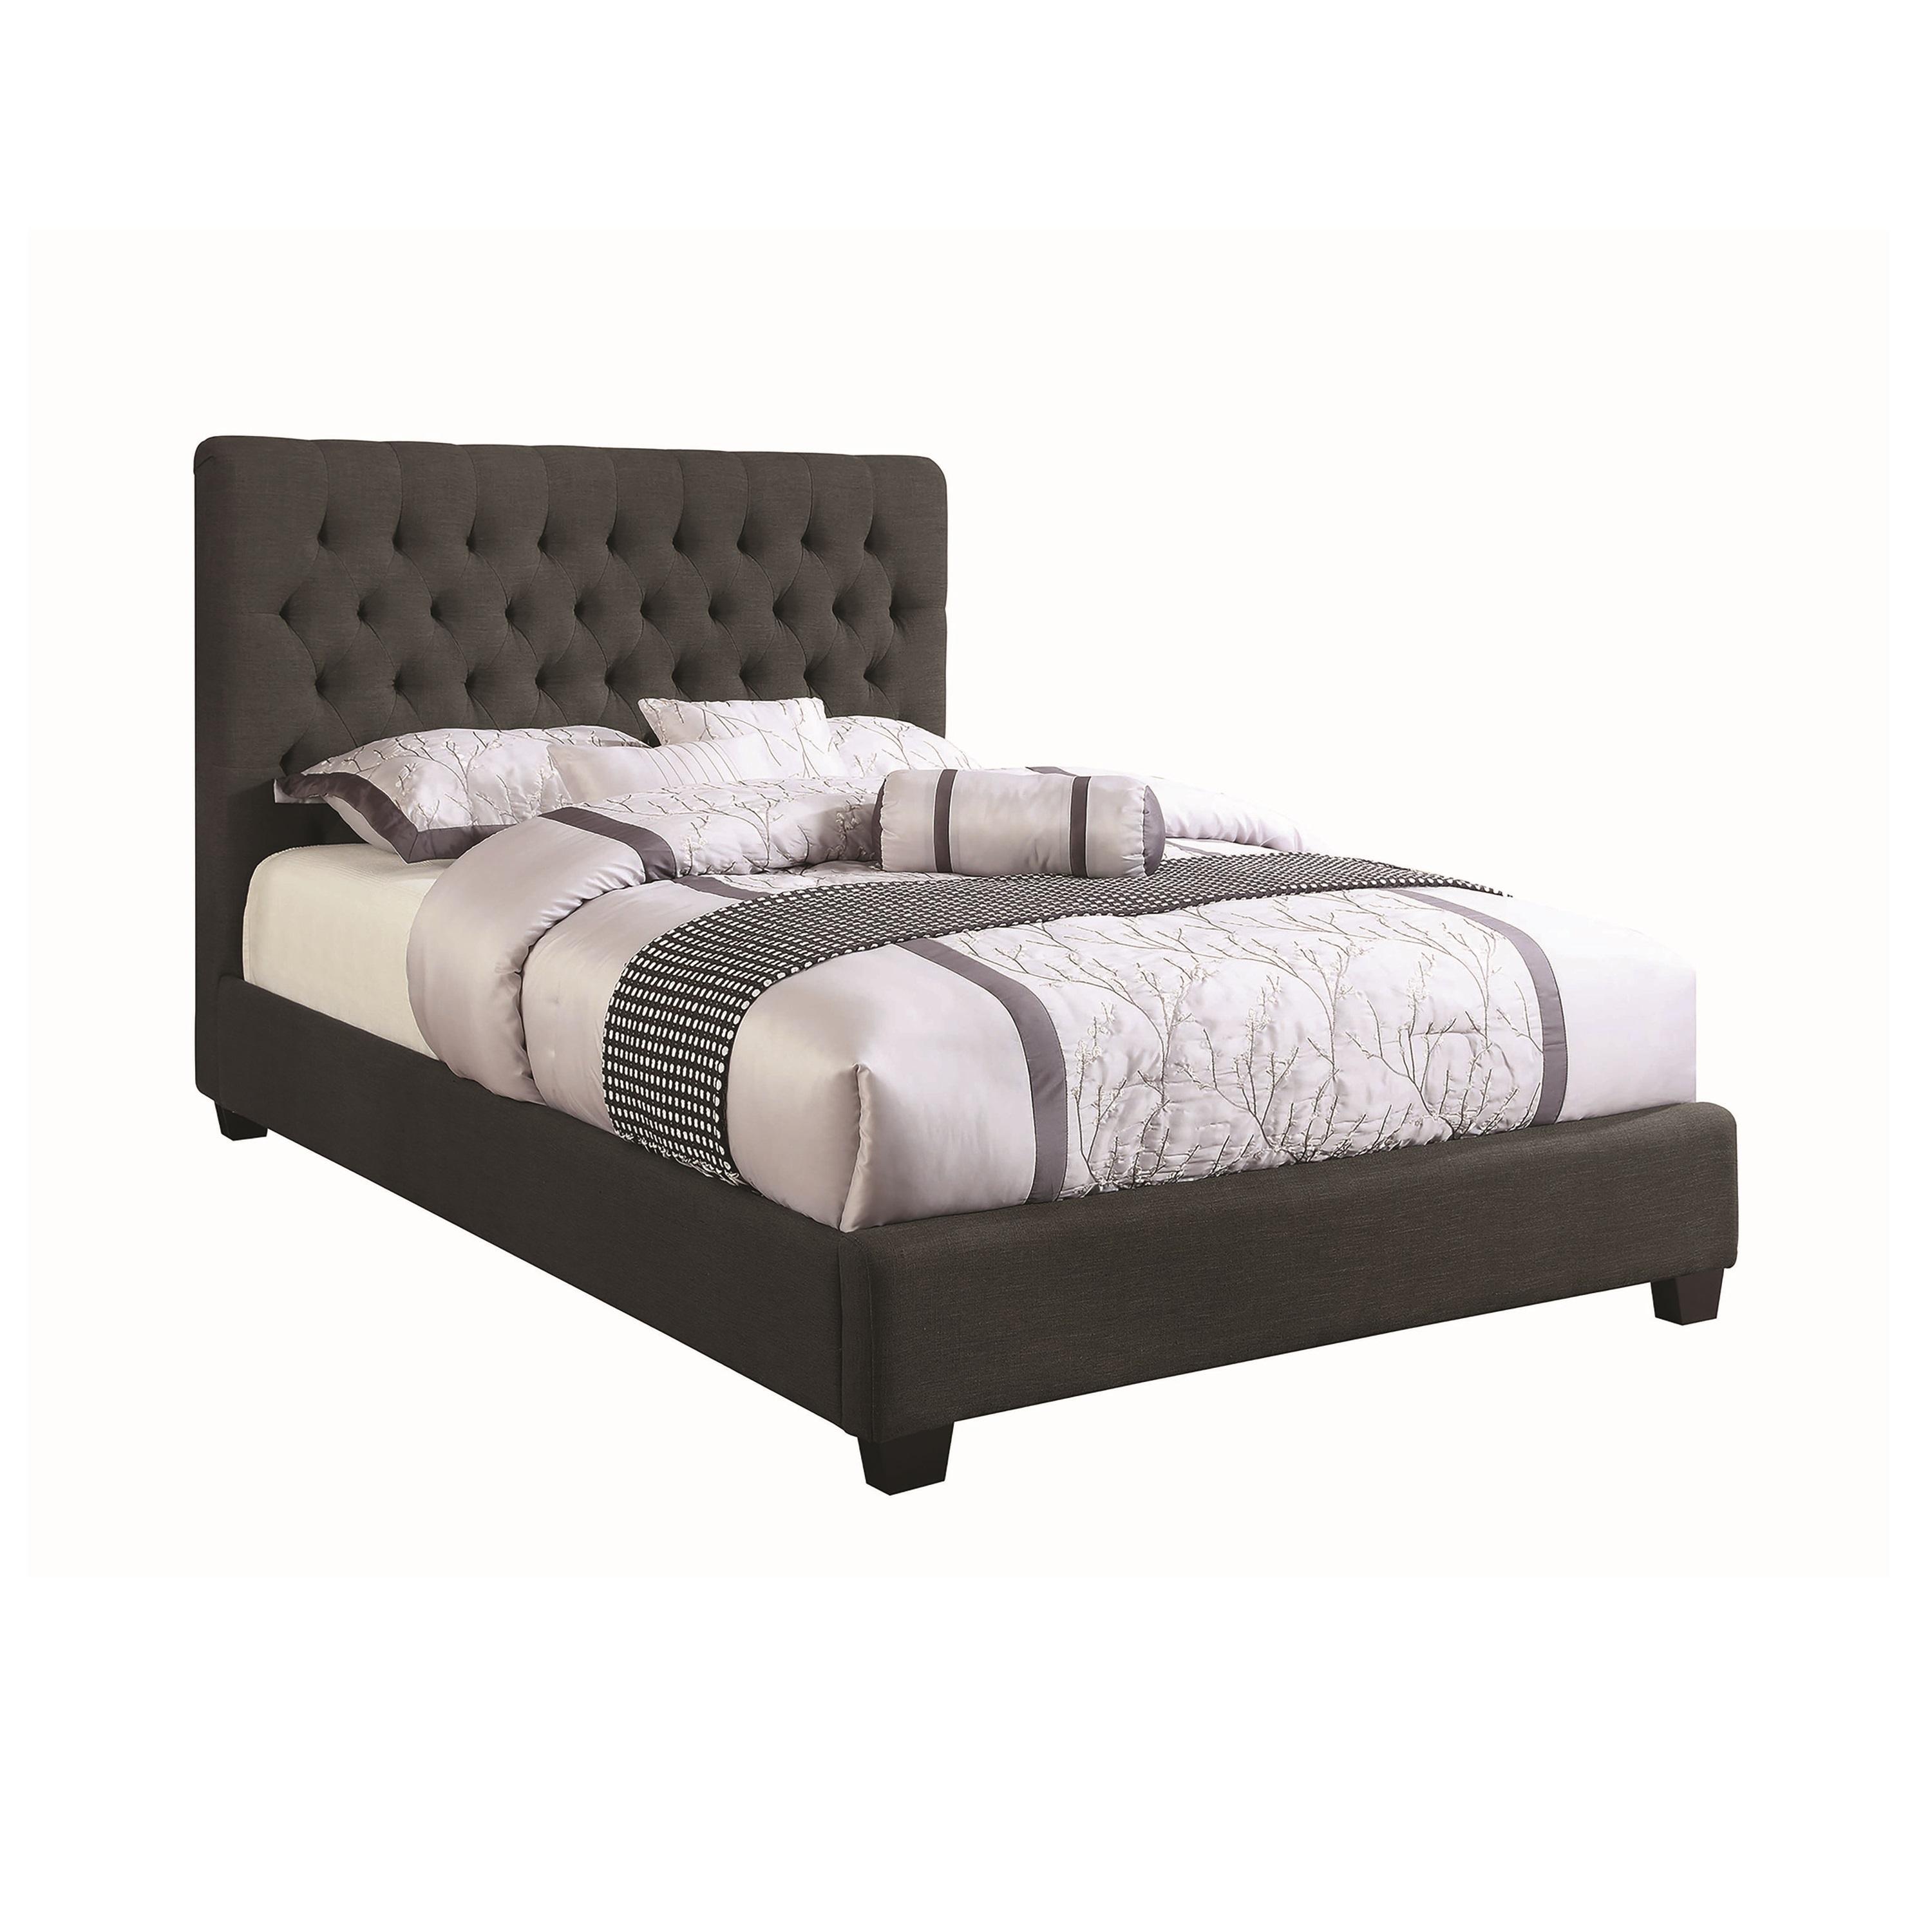 Contemporary Bed 300529F Chloe 300529F in Charcoal Fabric